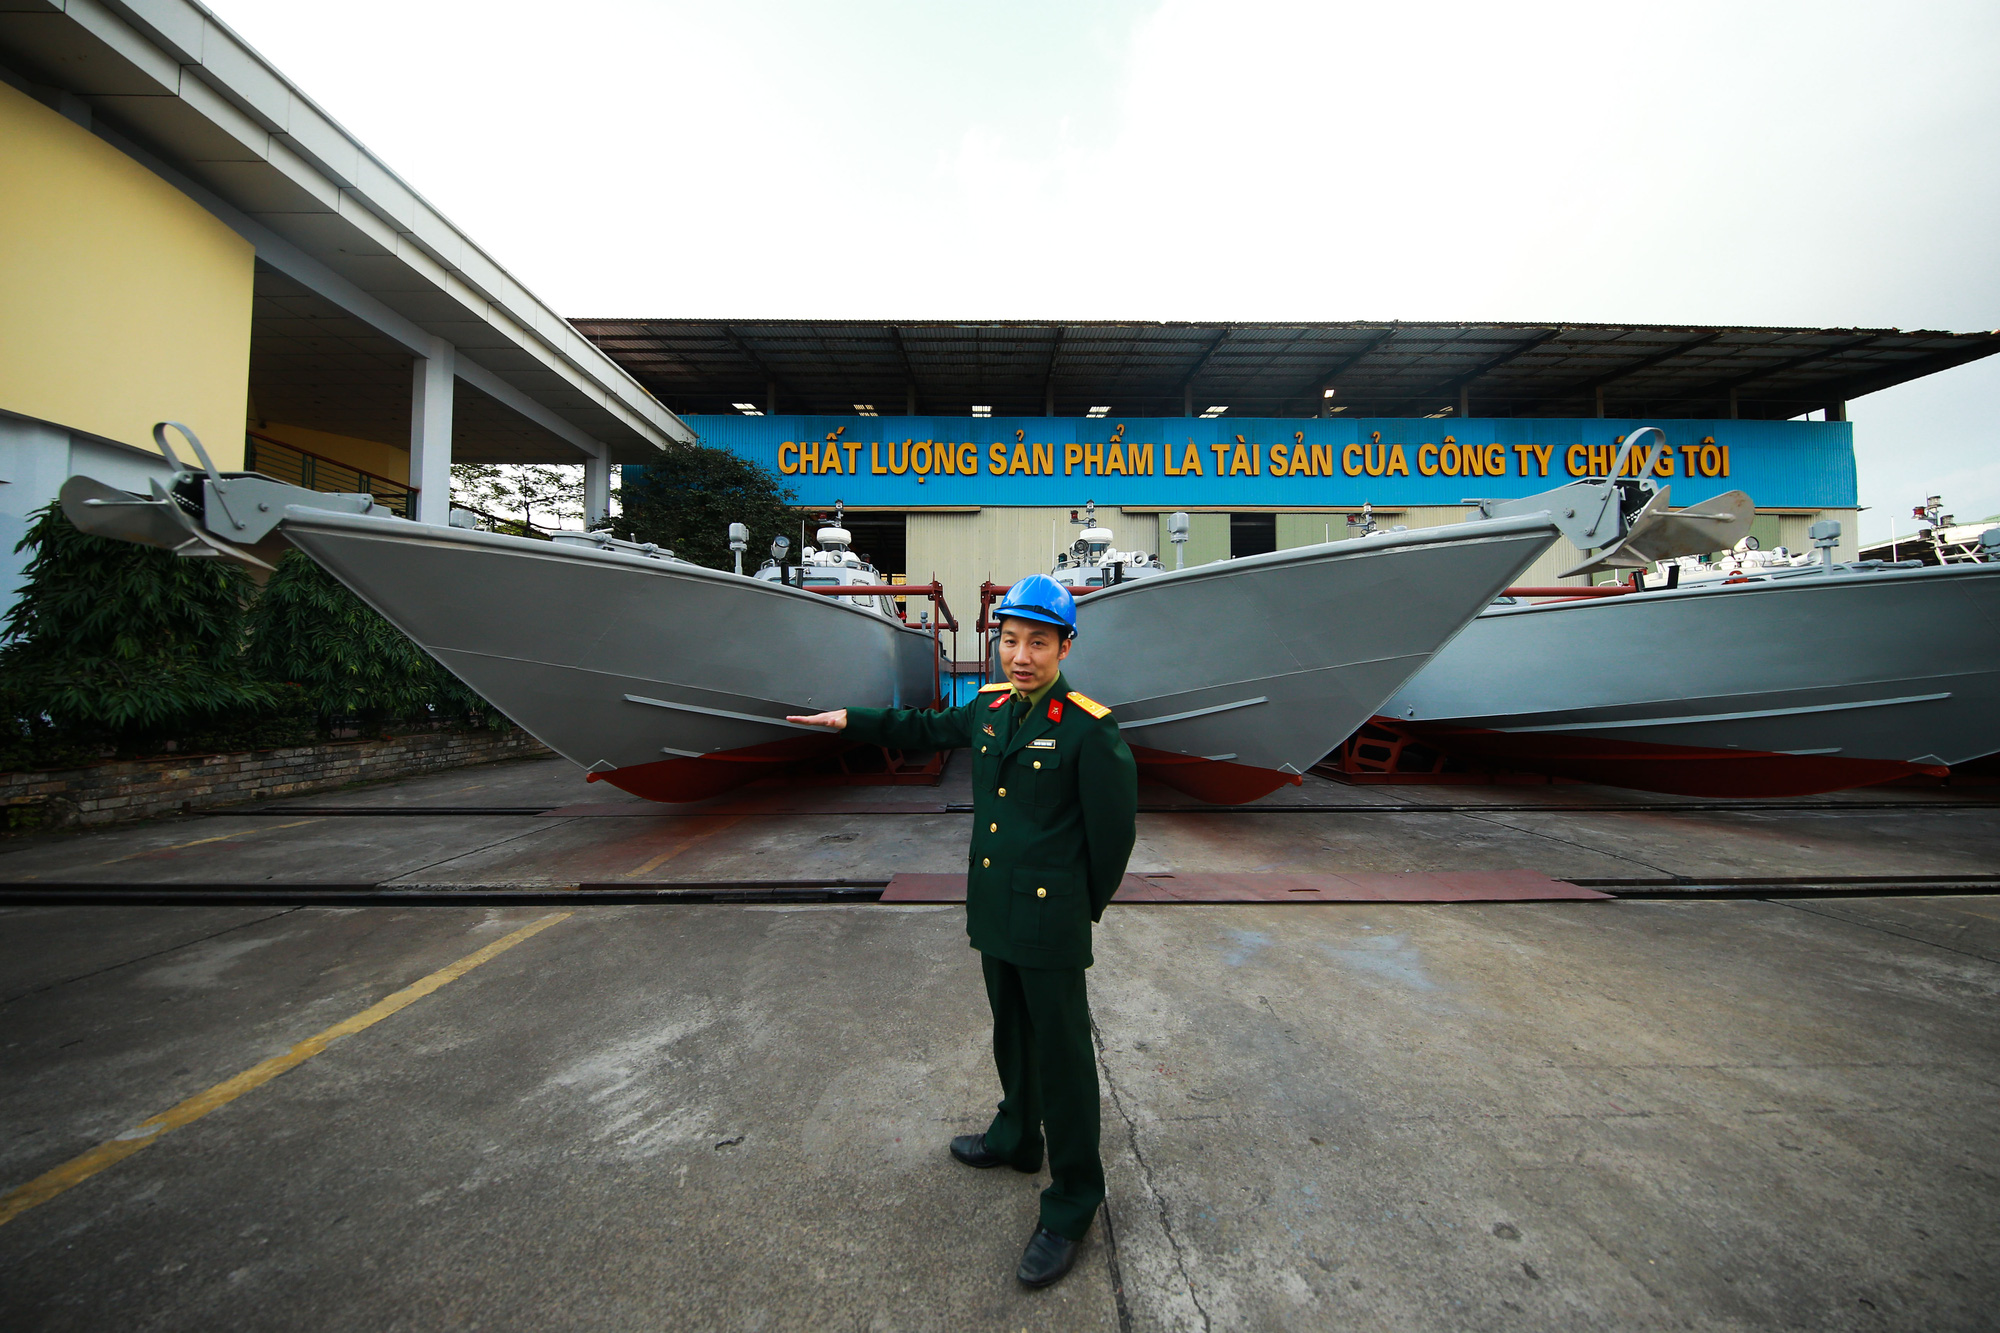 Lieutenant Colonel Nguyen Thanh Trung, a representative of Hong Ha Company, introduces the steel armored patrol boats. Photo: Nguyen Khanh / Tuoi Tre